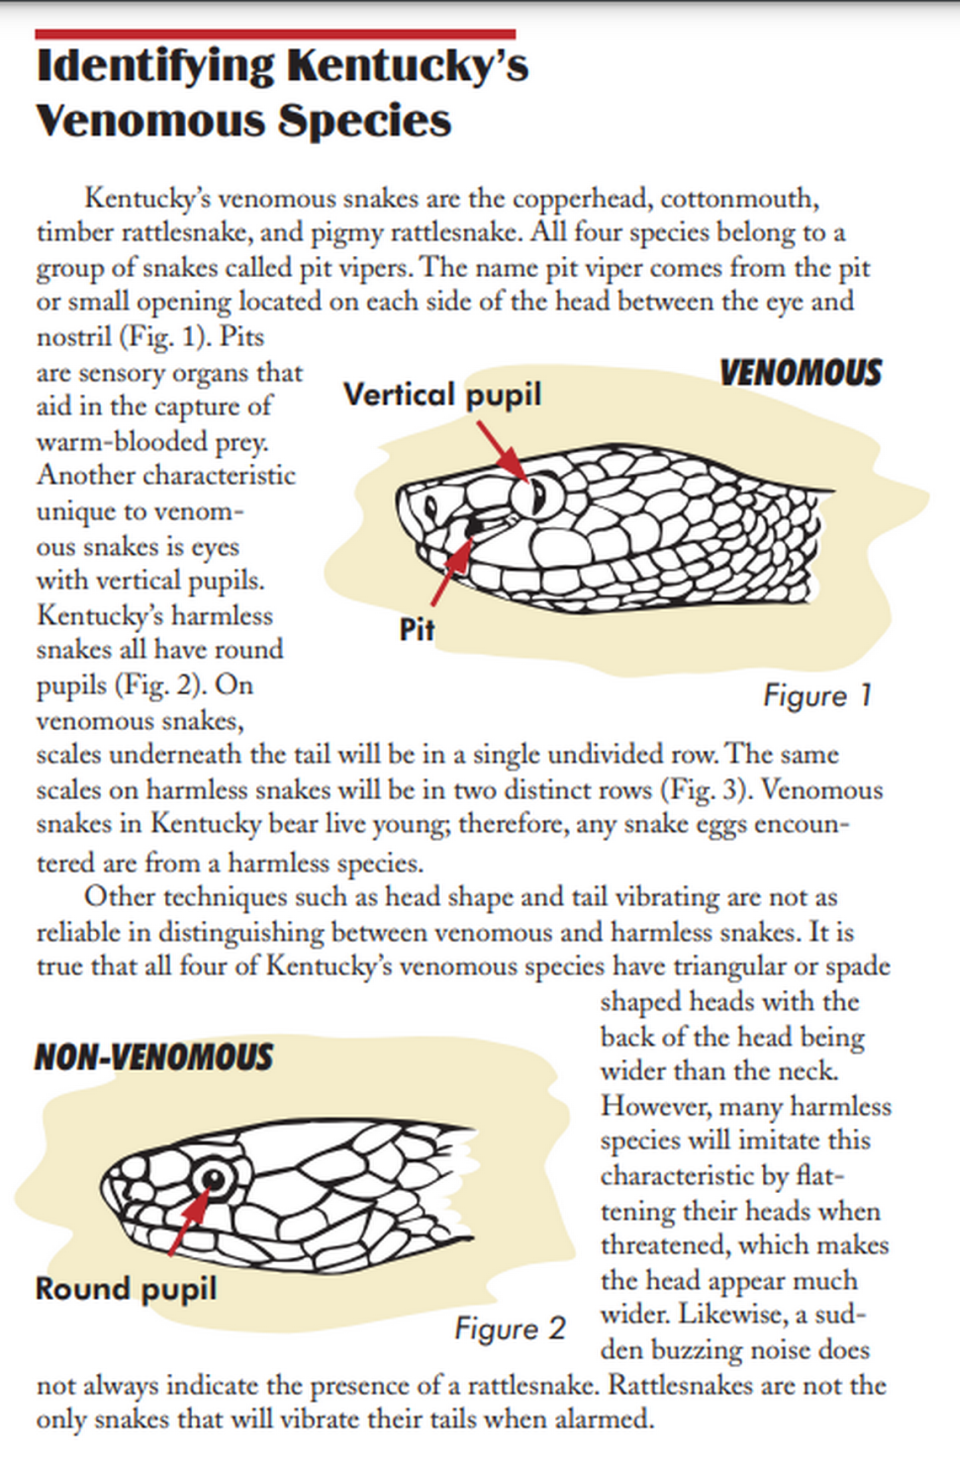 An excerpt from a guide published by the Kentucky Department of Fish and Wildlife Resources covering Kentucky’s venomous snakes.